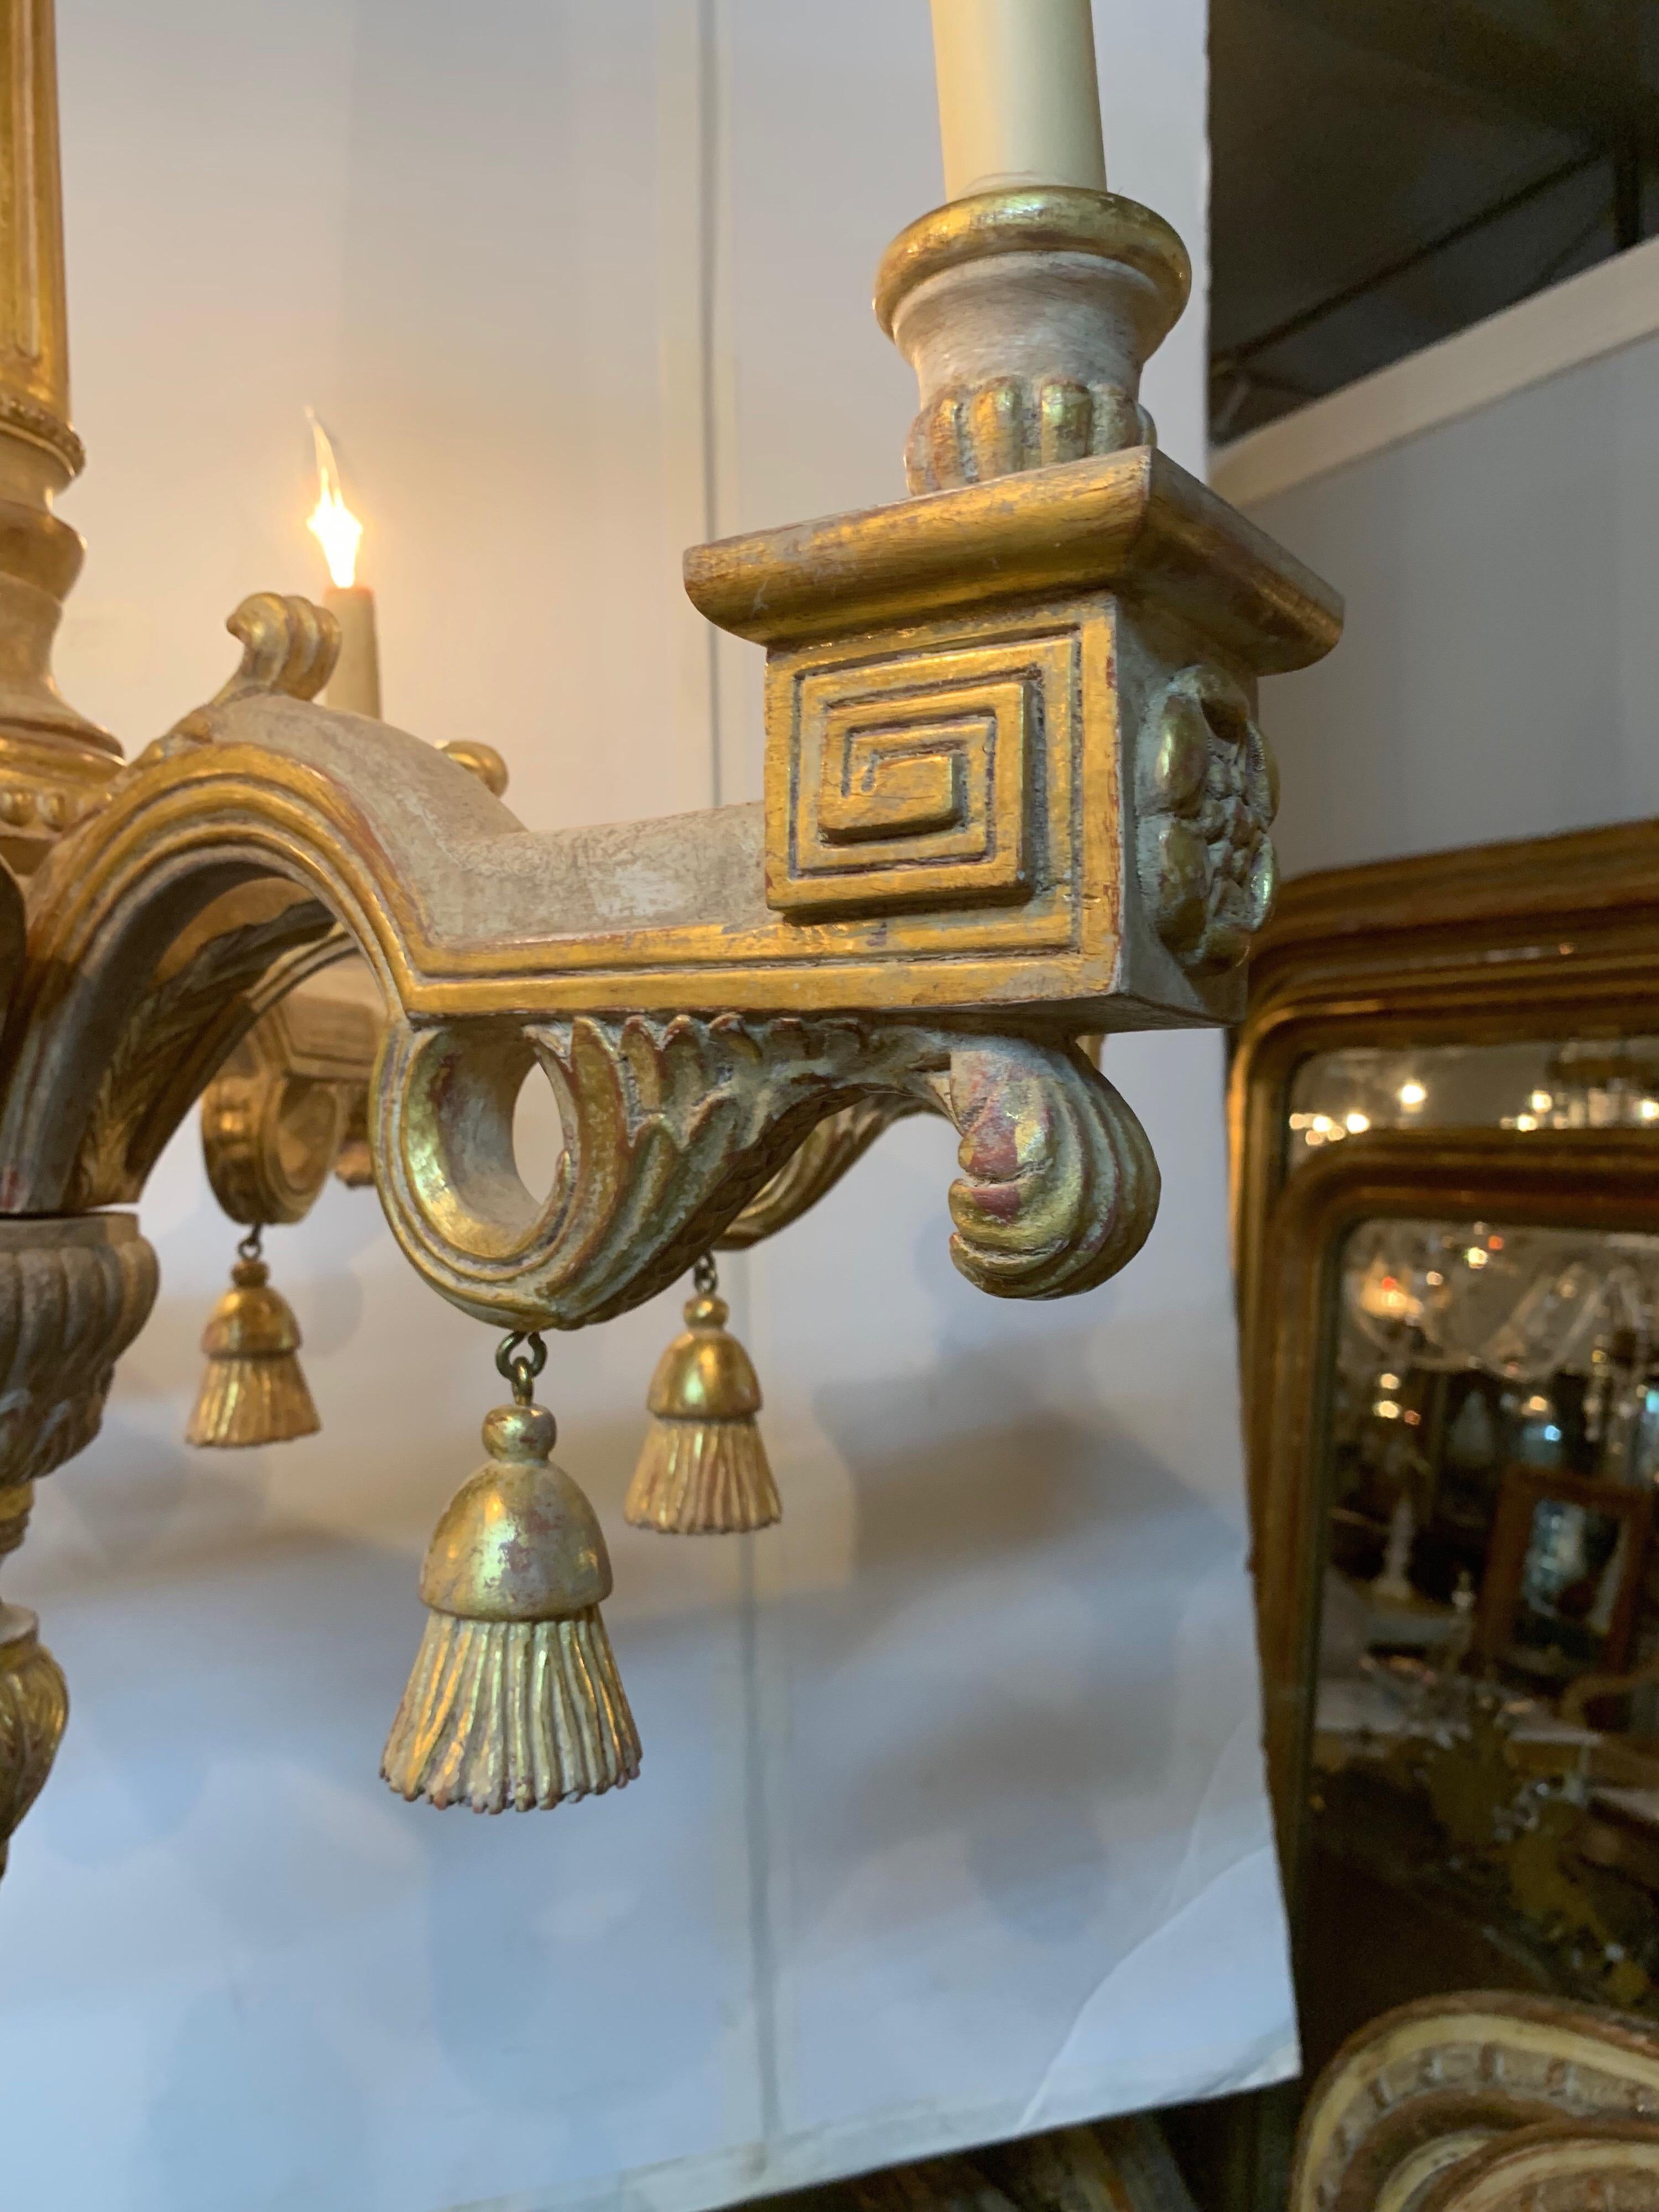 Beautiful Italian carved and parcel gilt chandelier with 6 lights. Very nice carving and gold gilt on this fixture. Truly elegant for a fine home.